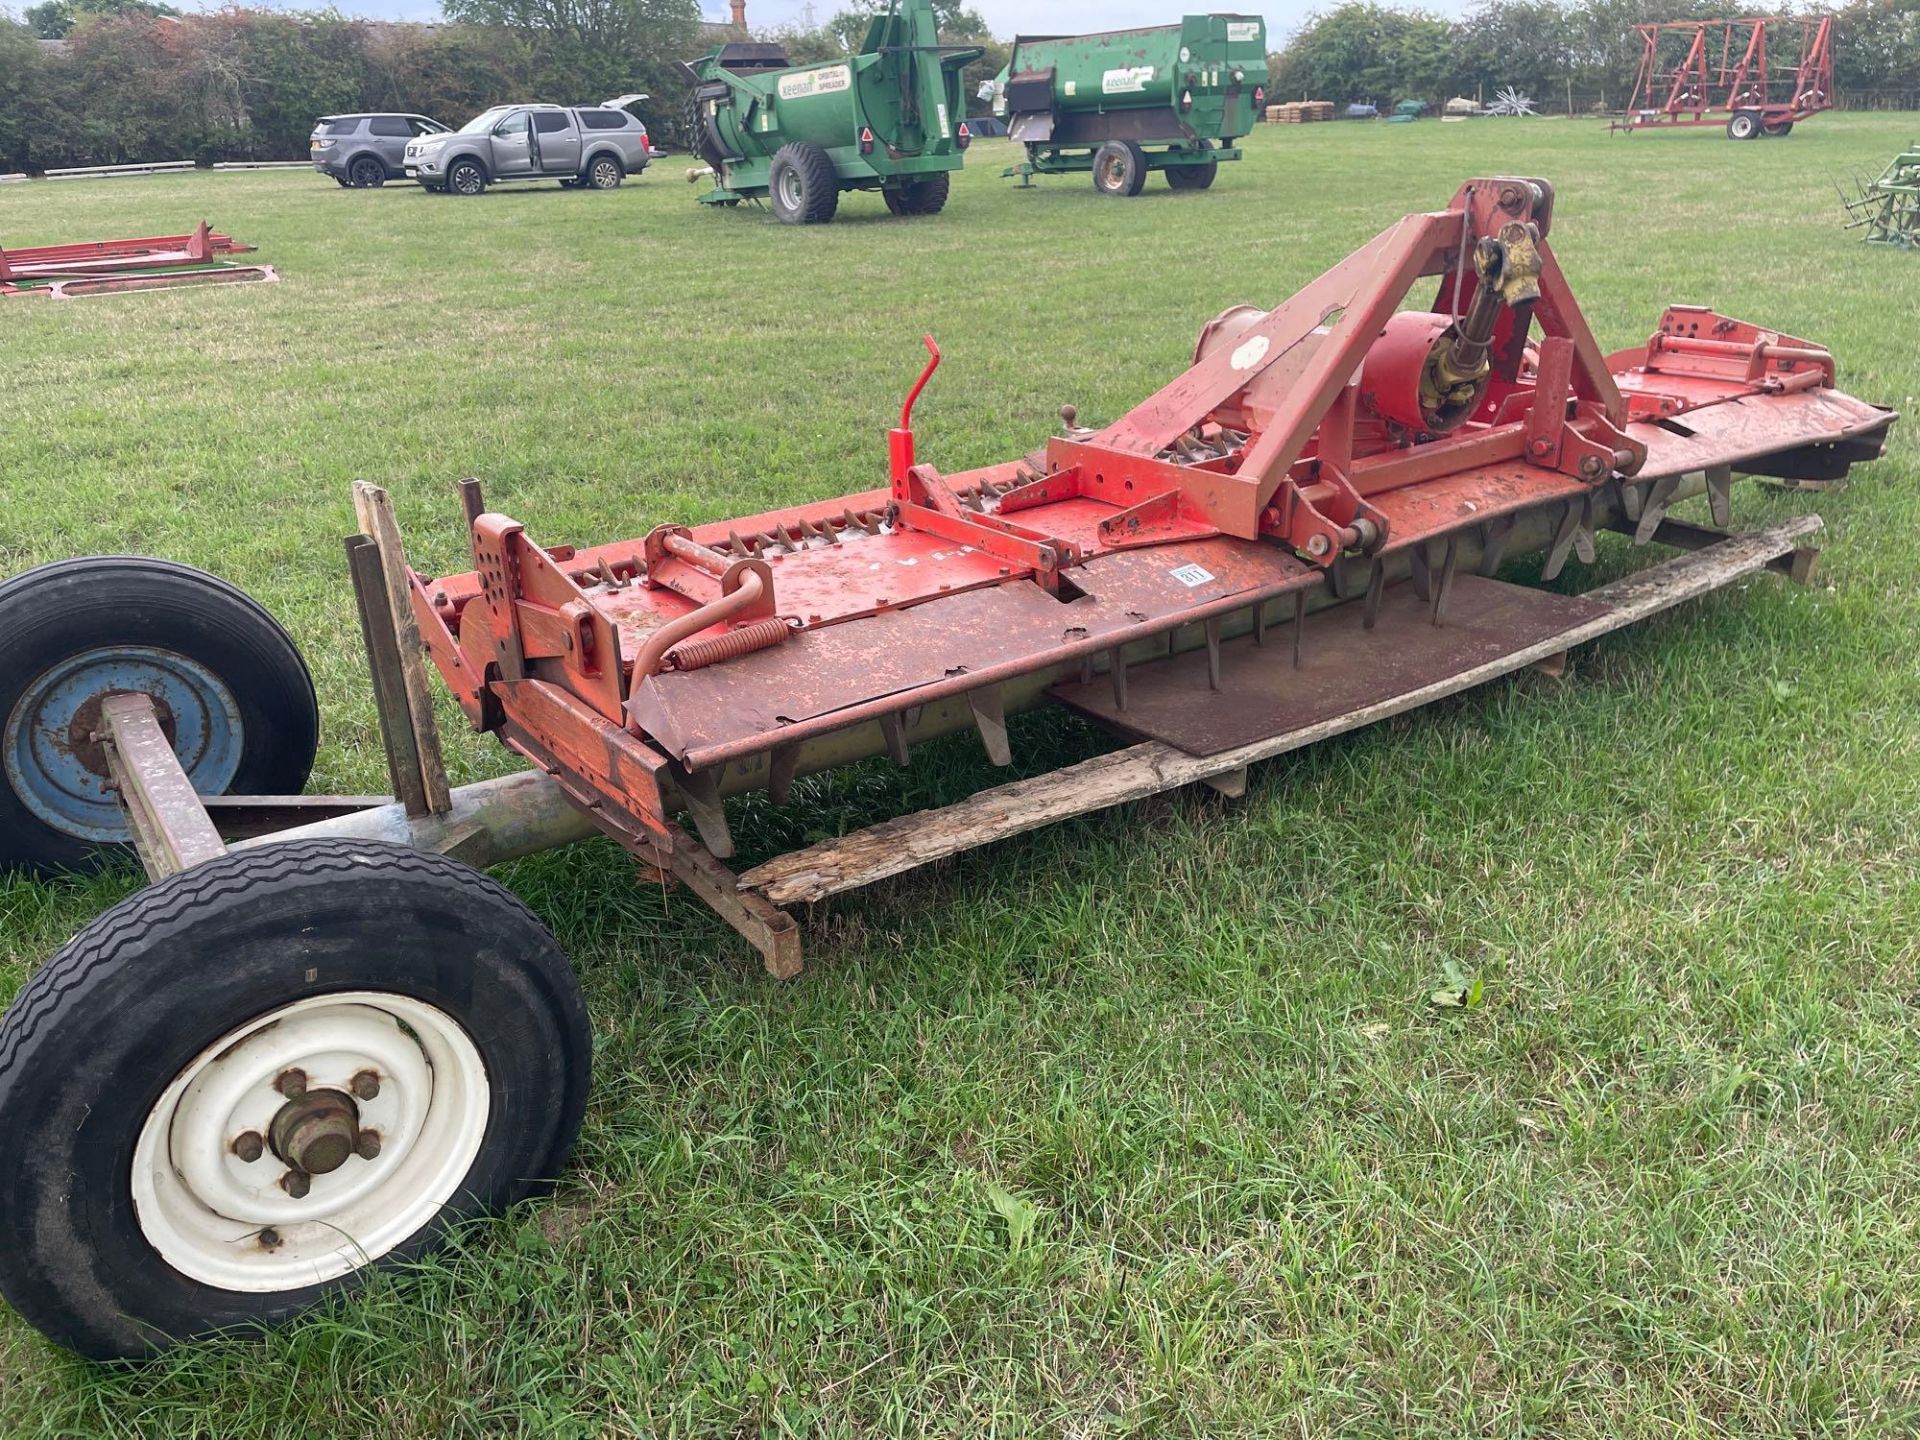 Kuhn HR4001 power harrow with rear crumbler and end tow kit comes with low loader trailer, PTO drive - Image 4 of 4